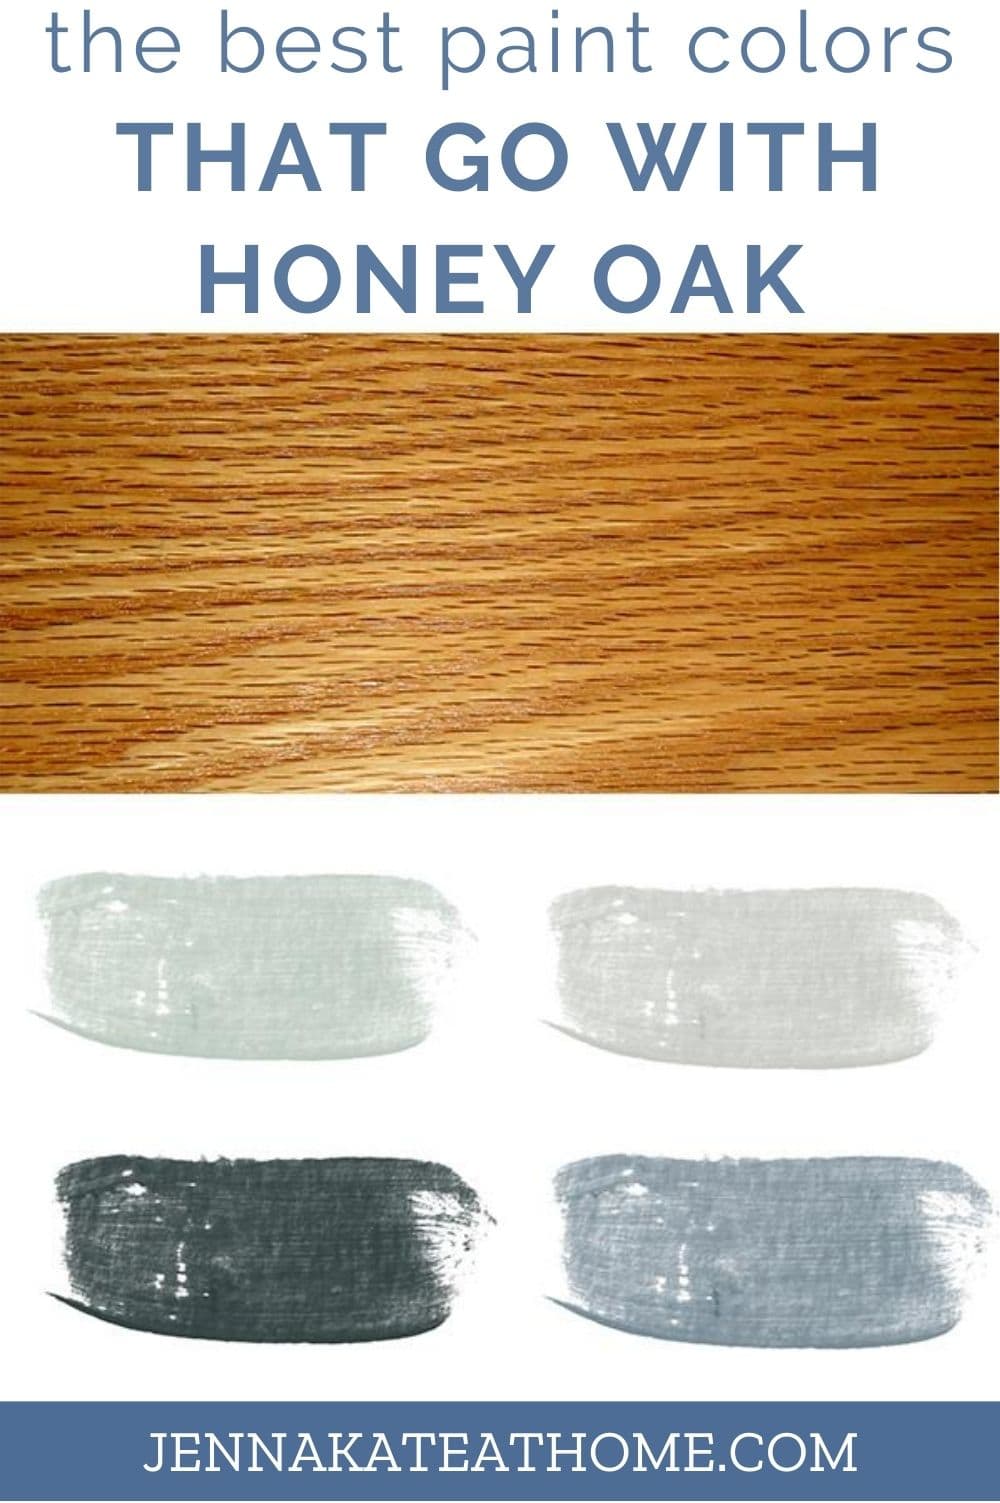 Paint Colors That Go Best With Honey Oak Jenna Kate at Home